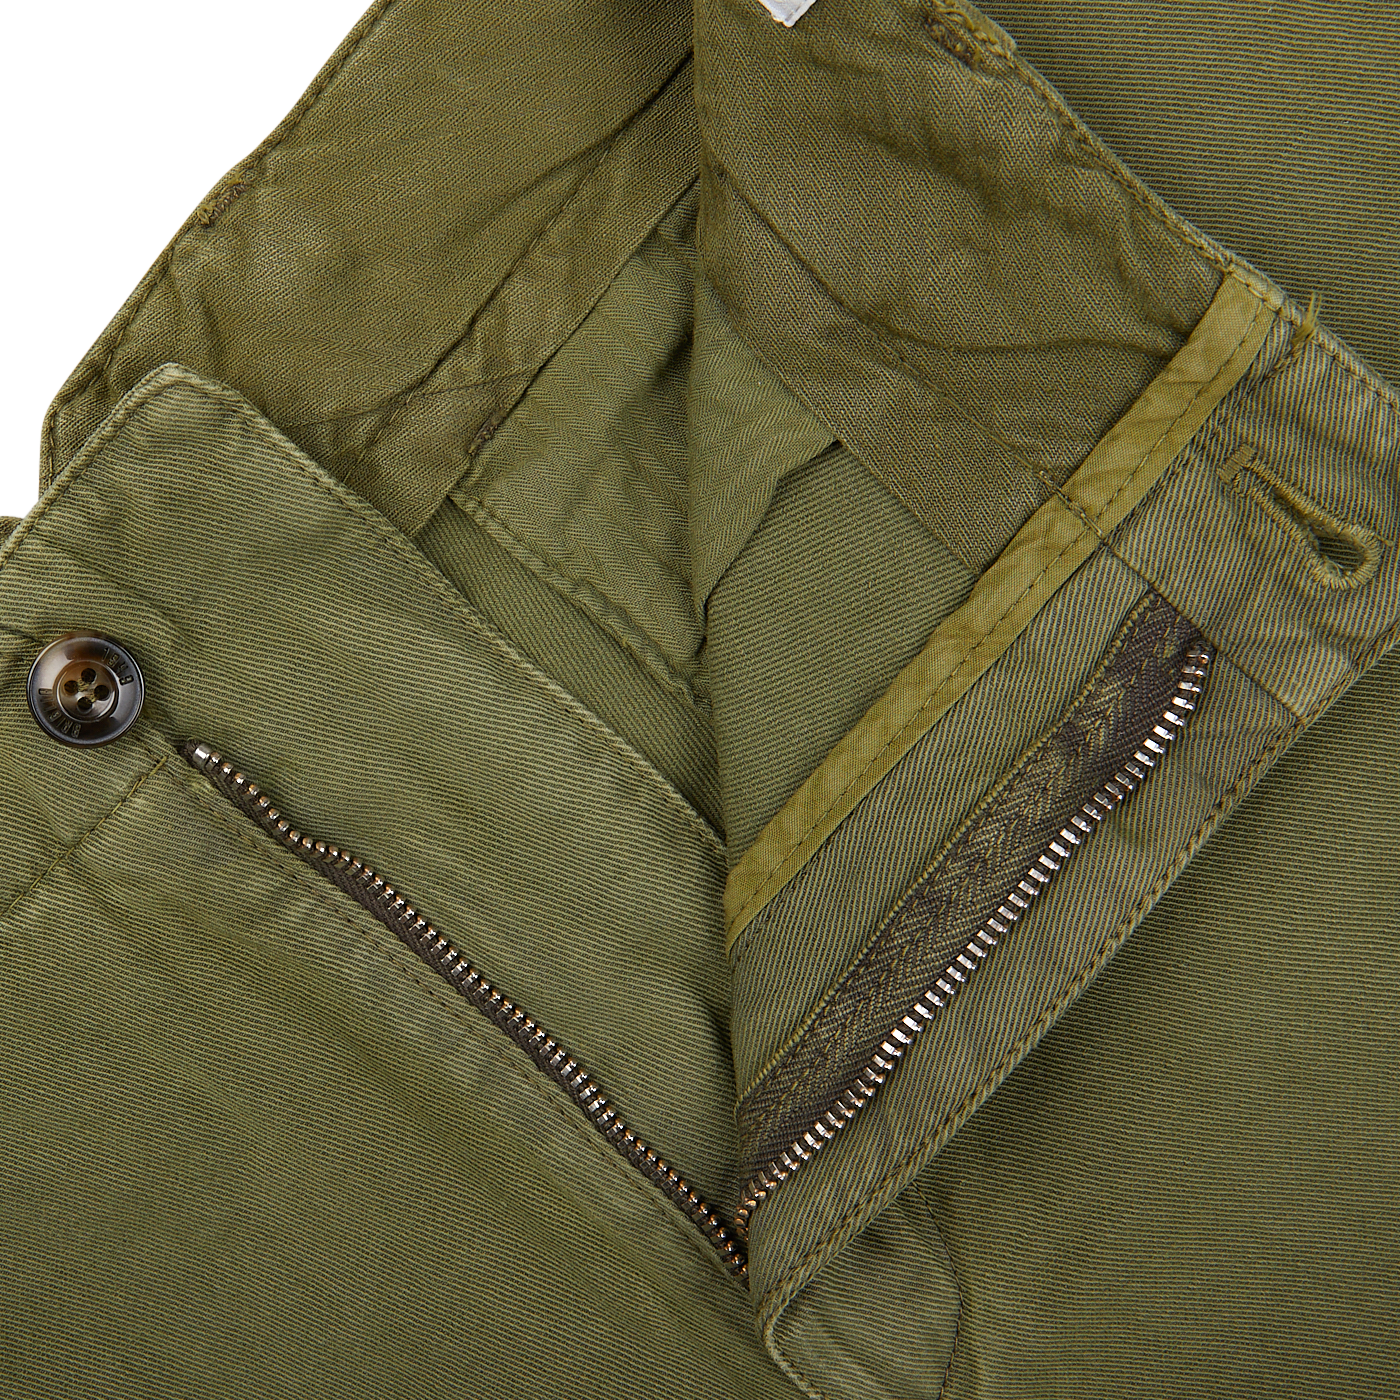 Grass Green Cotton Linen Pleated Shorts by Briglia with a zipper fly, button closure, and an adjustable waistband.